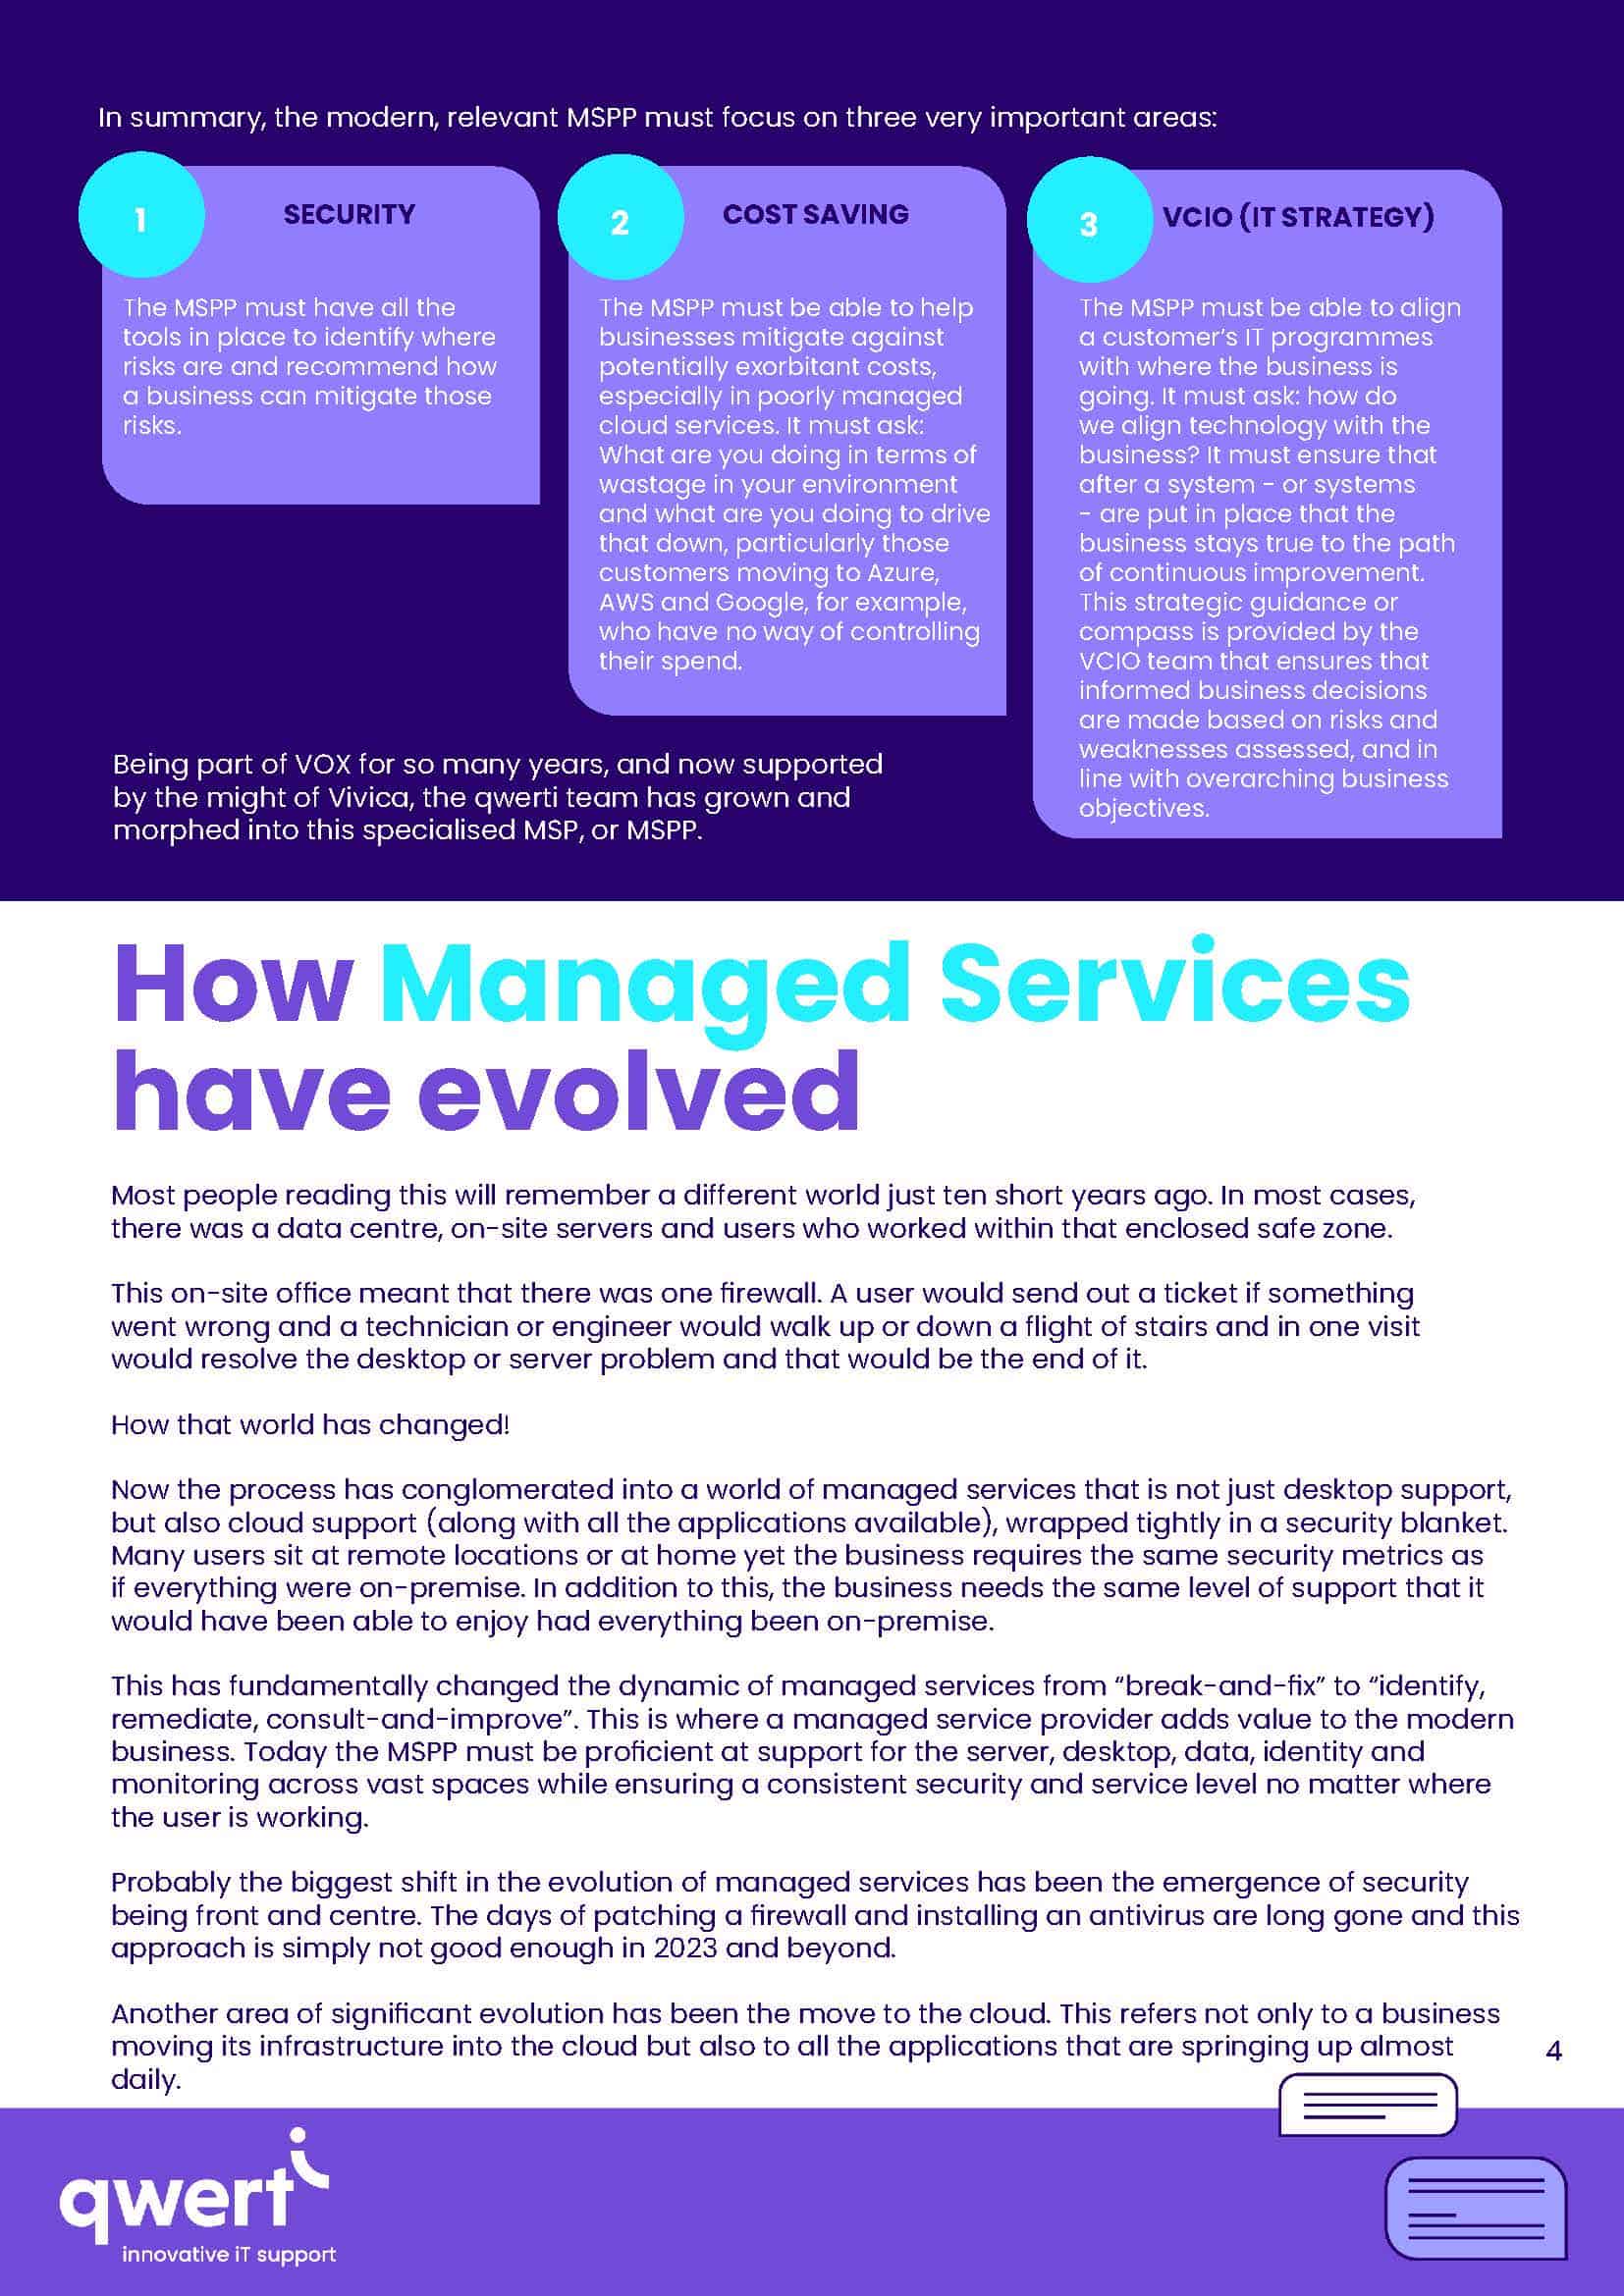 The future of managed services by Qwerti 4